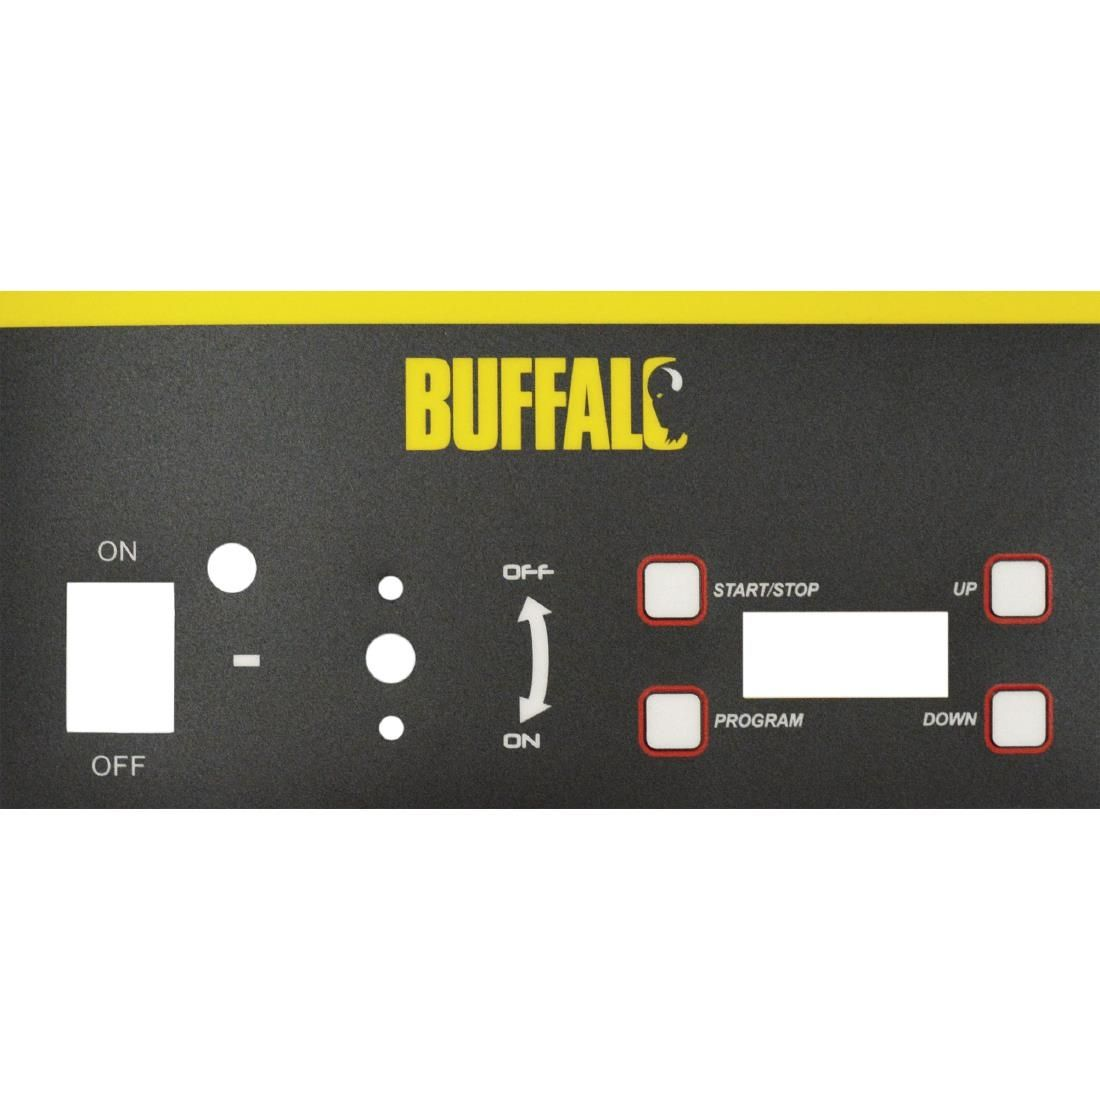 Buffalo Decal Sticker AF493 JD Catering Equipment Solutions Ltd